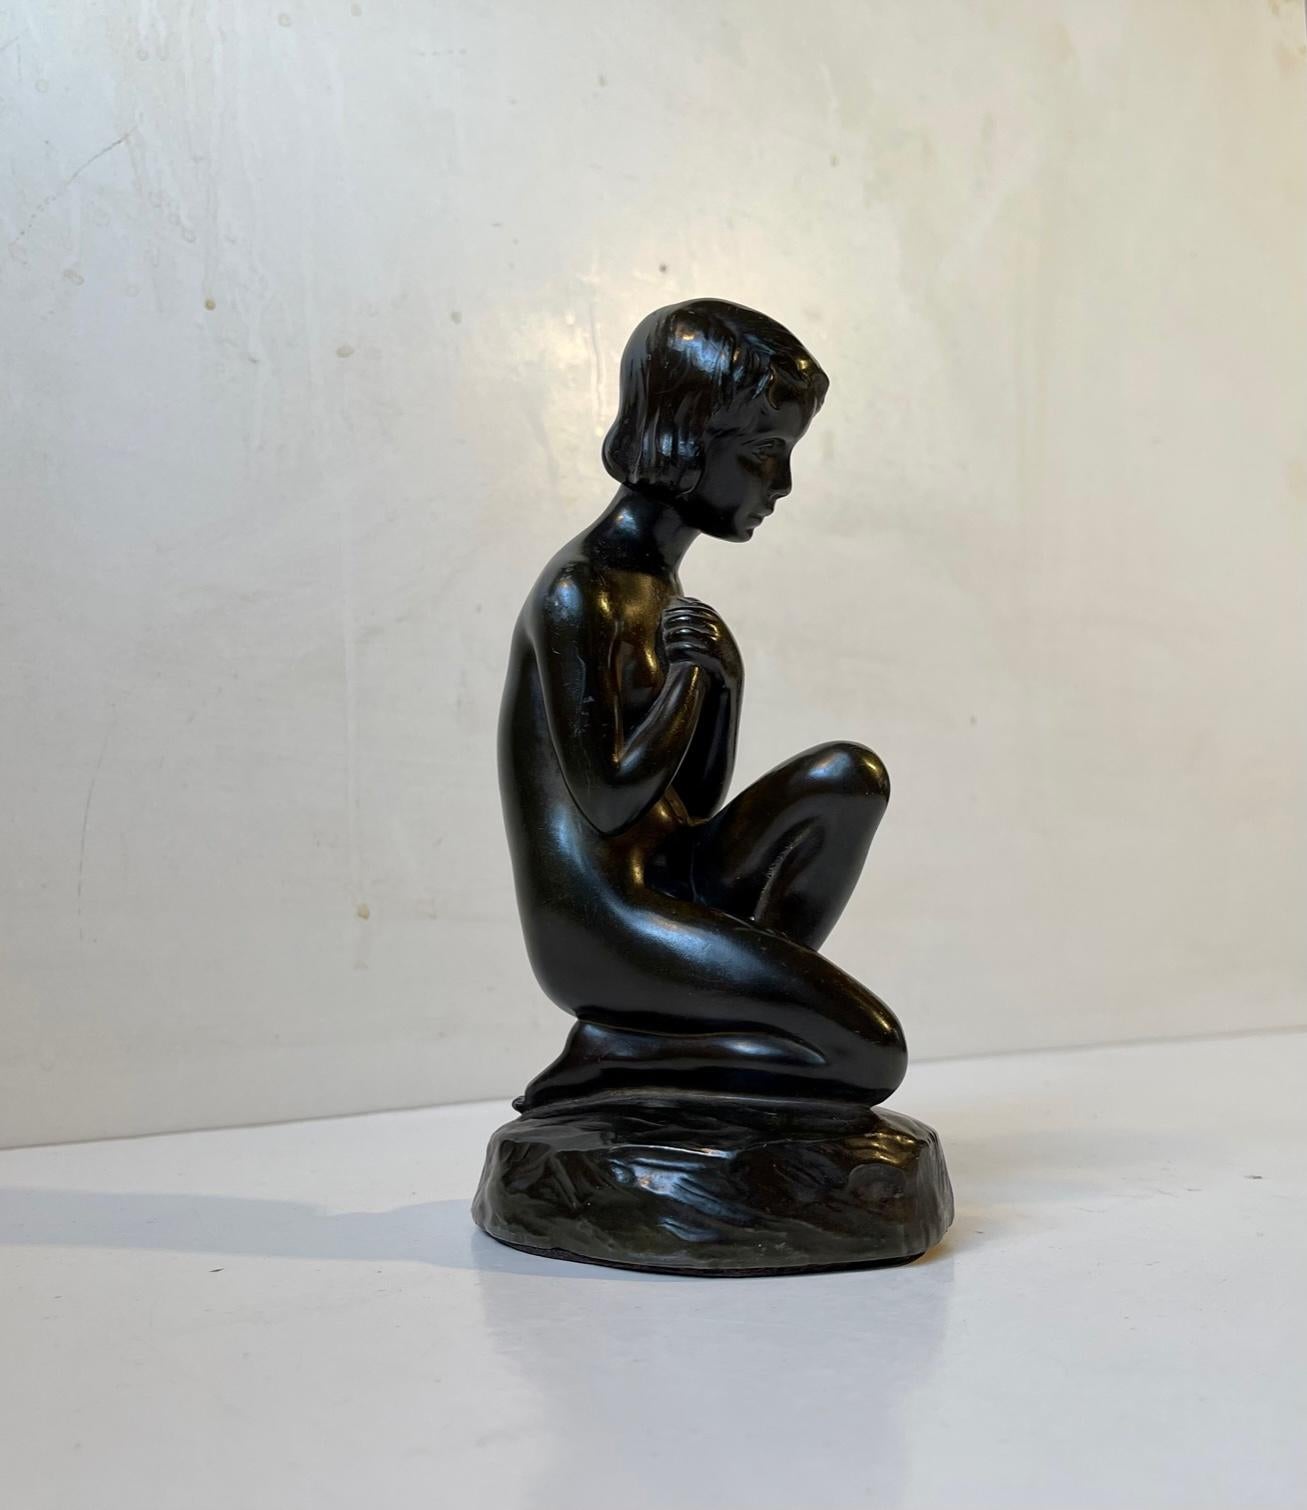 Erotically stylized small sculpture from Just Andersen designed 1930-40 by female sculptor and artist Elna Borch. Its Composed of Just Andersens own alloy/patina called Disko Metal. The figurine is signed to the side: E. Borch, Just, Denmark, D2017.